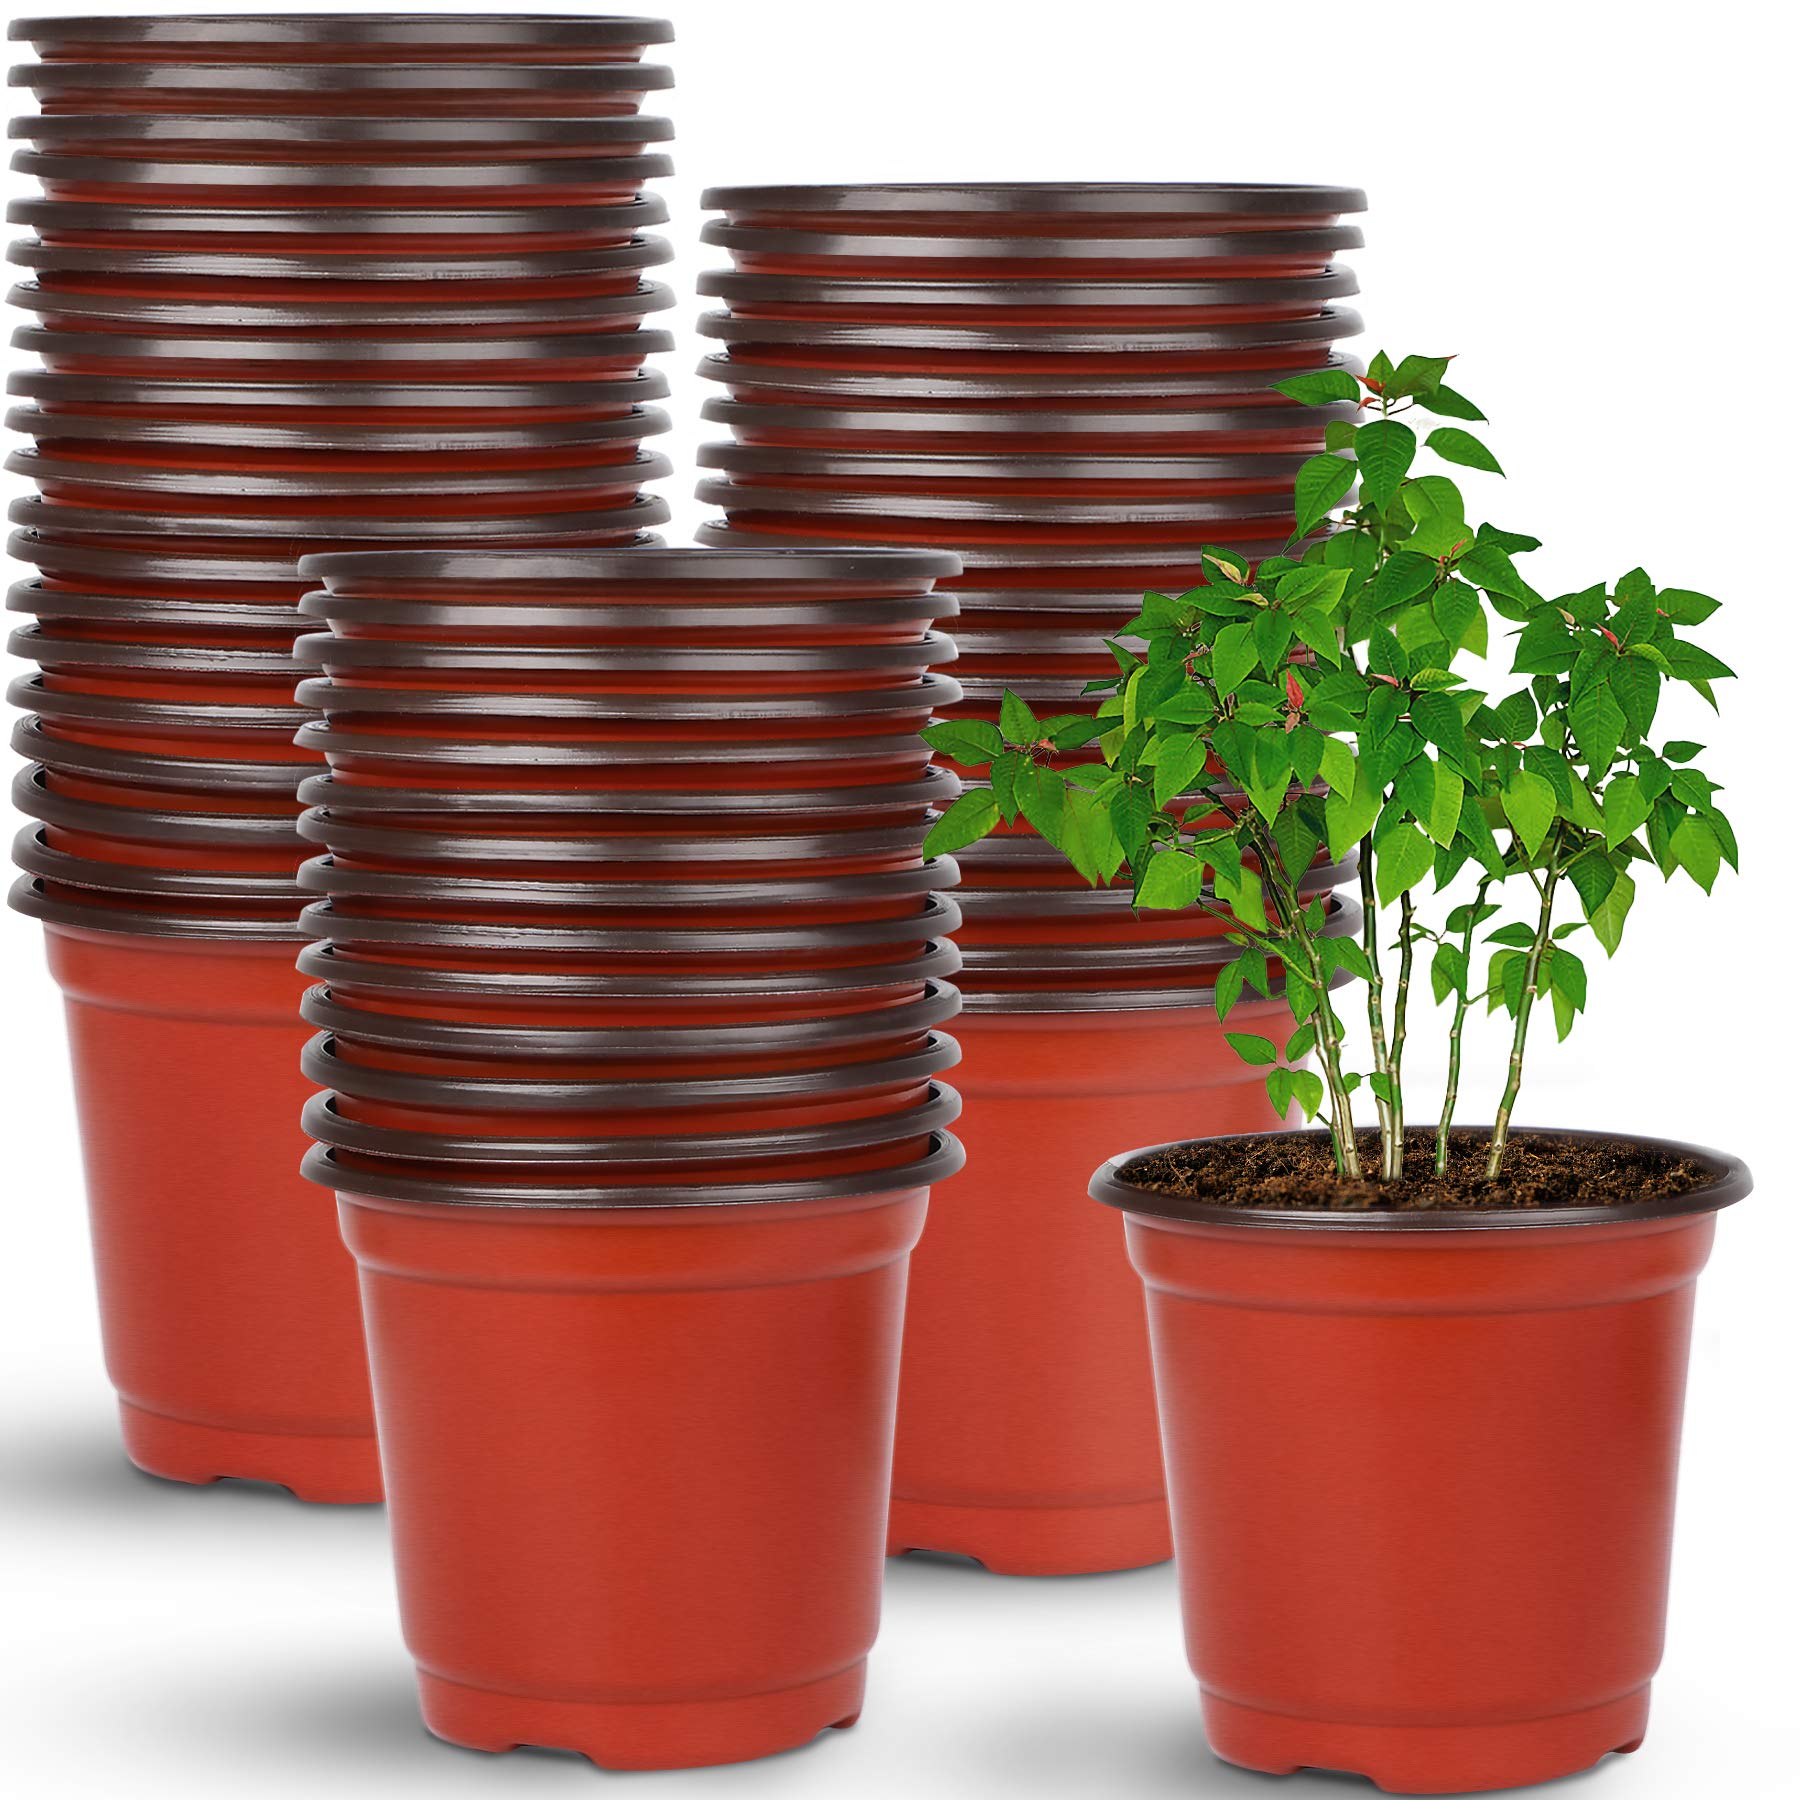 Nursery Pots: Cultivating Growth and Beauty插图2